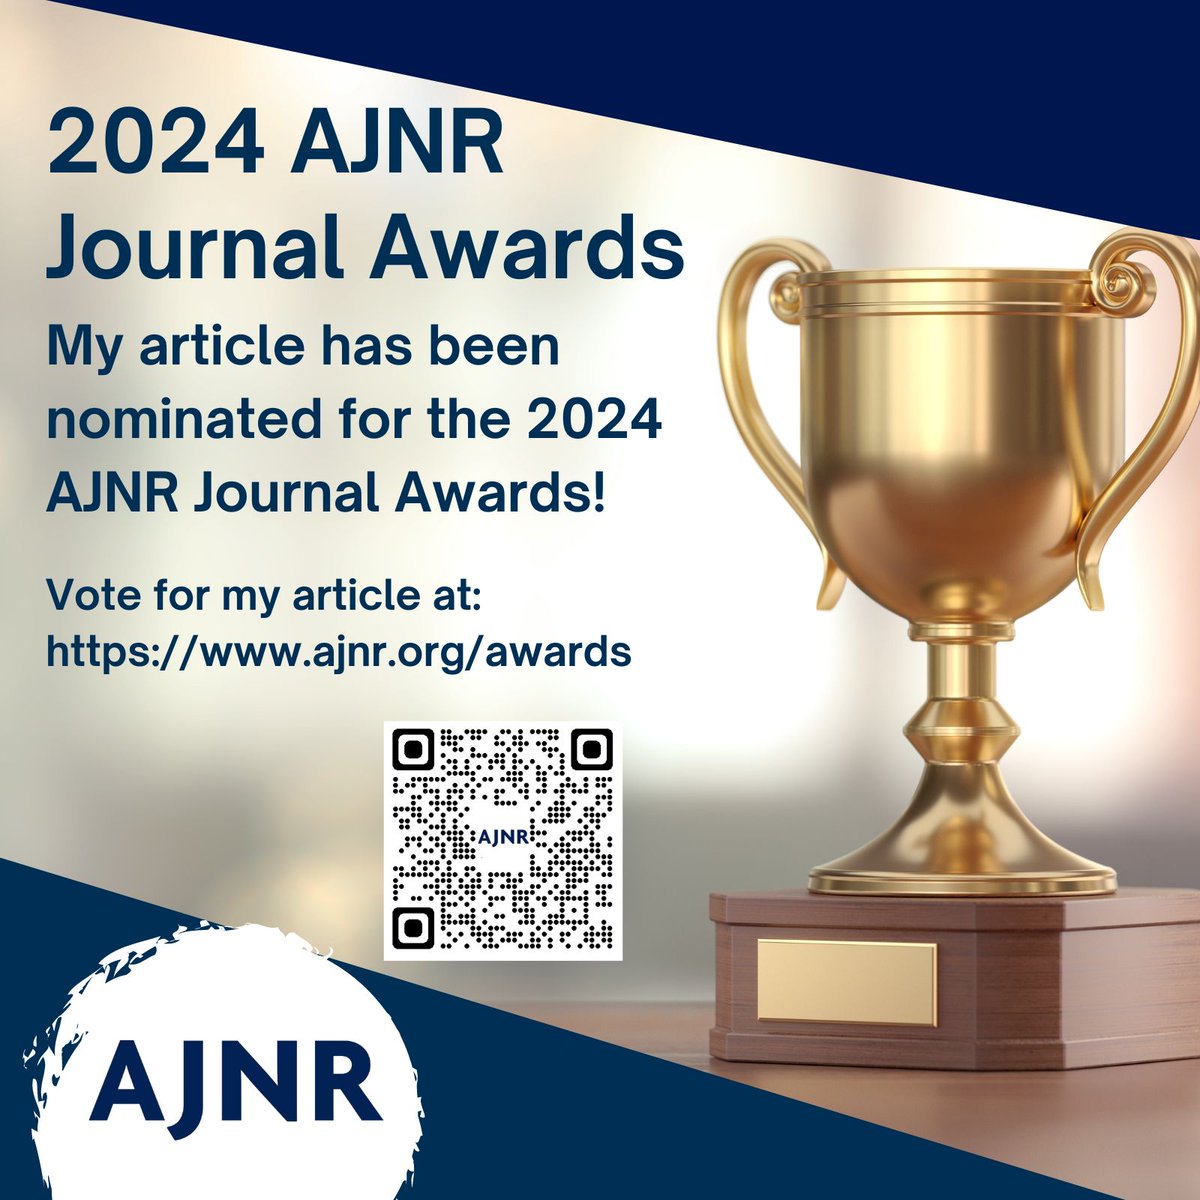 'Introducing Our New AJNR Early Career, Women in Neuroradiology, and Global Neuroradiology Awards' doi.org/10.3174/ajnr.A… Vote at: ajnr.org/awards Awards will be announced at #ASNR24